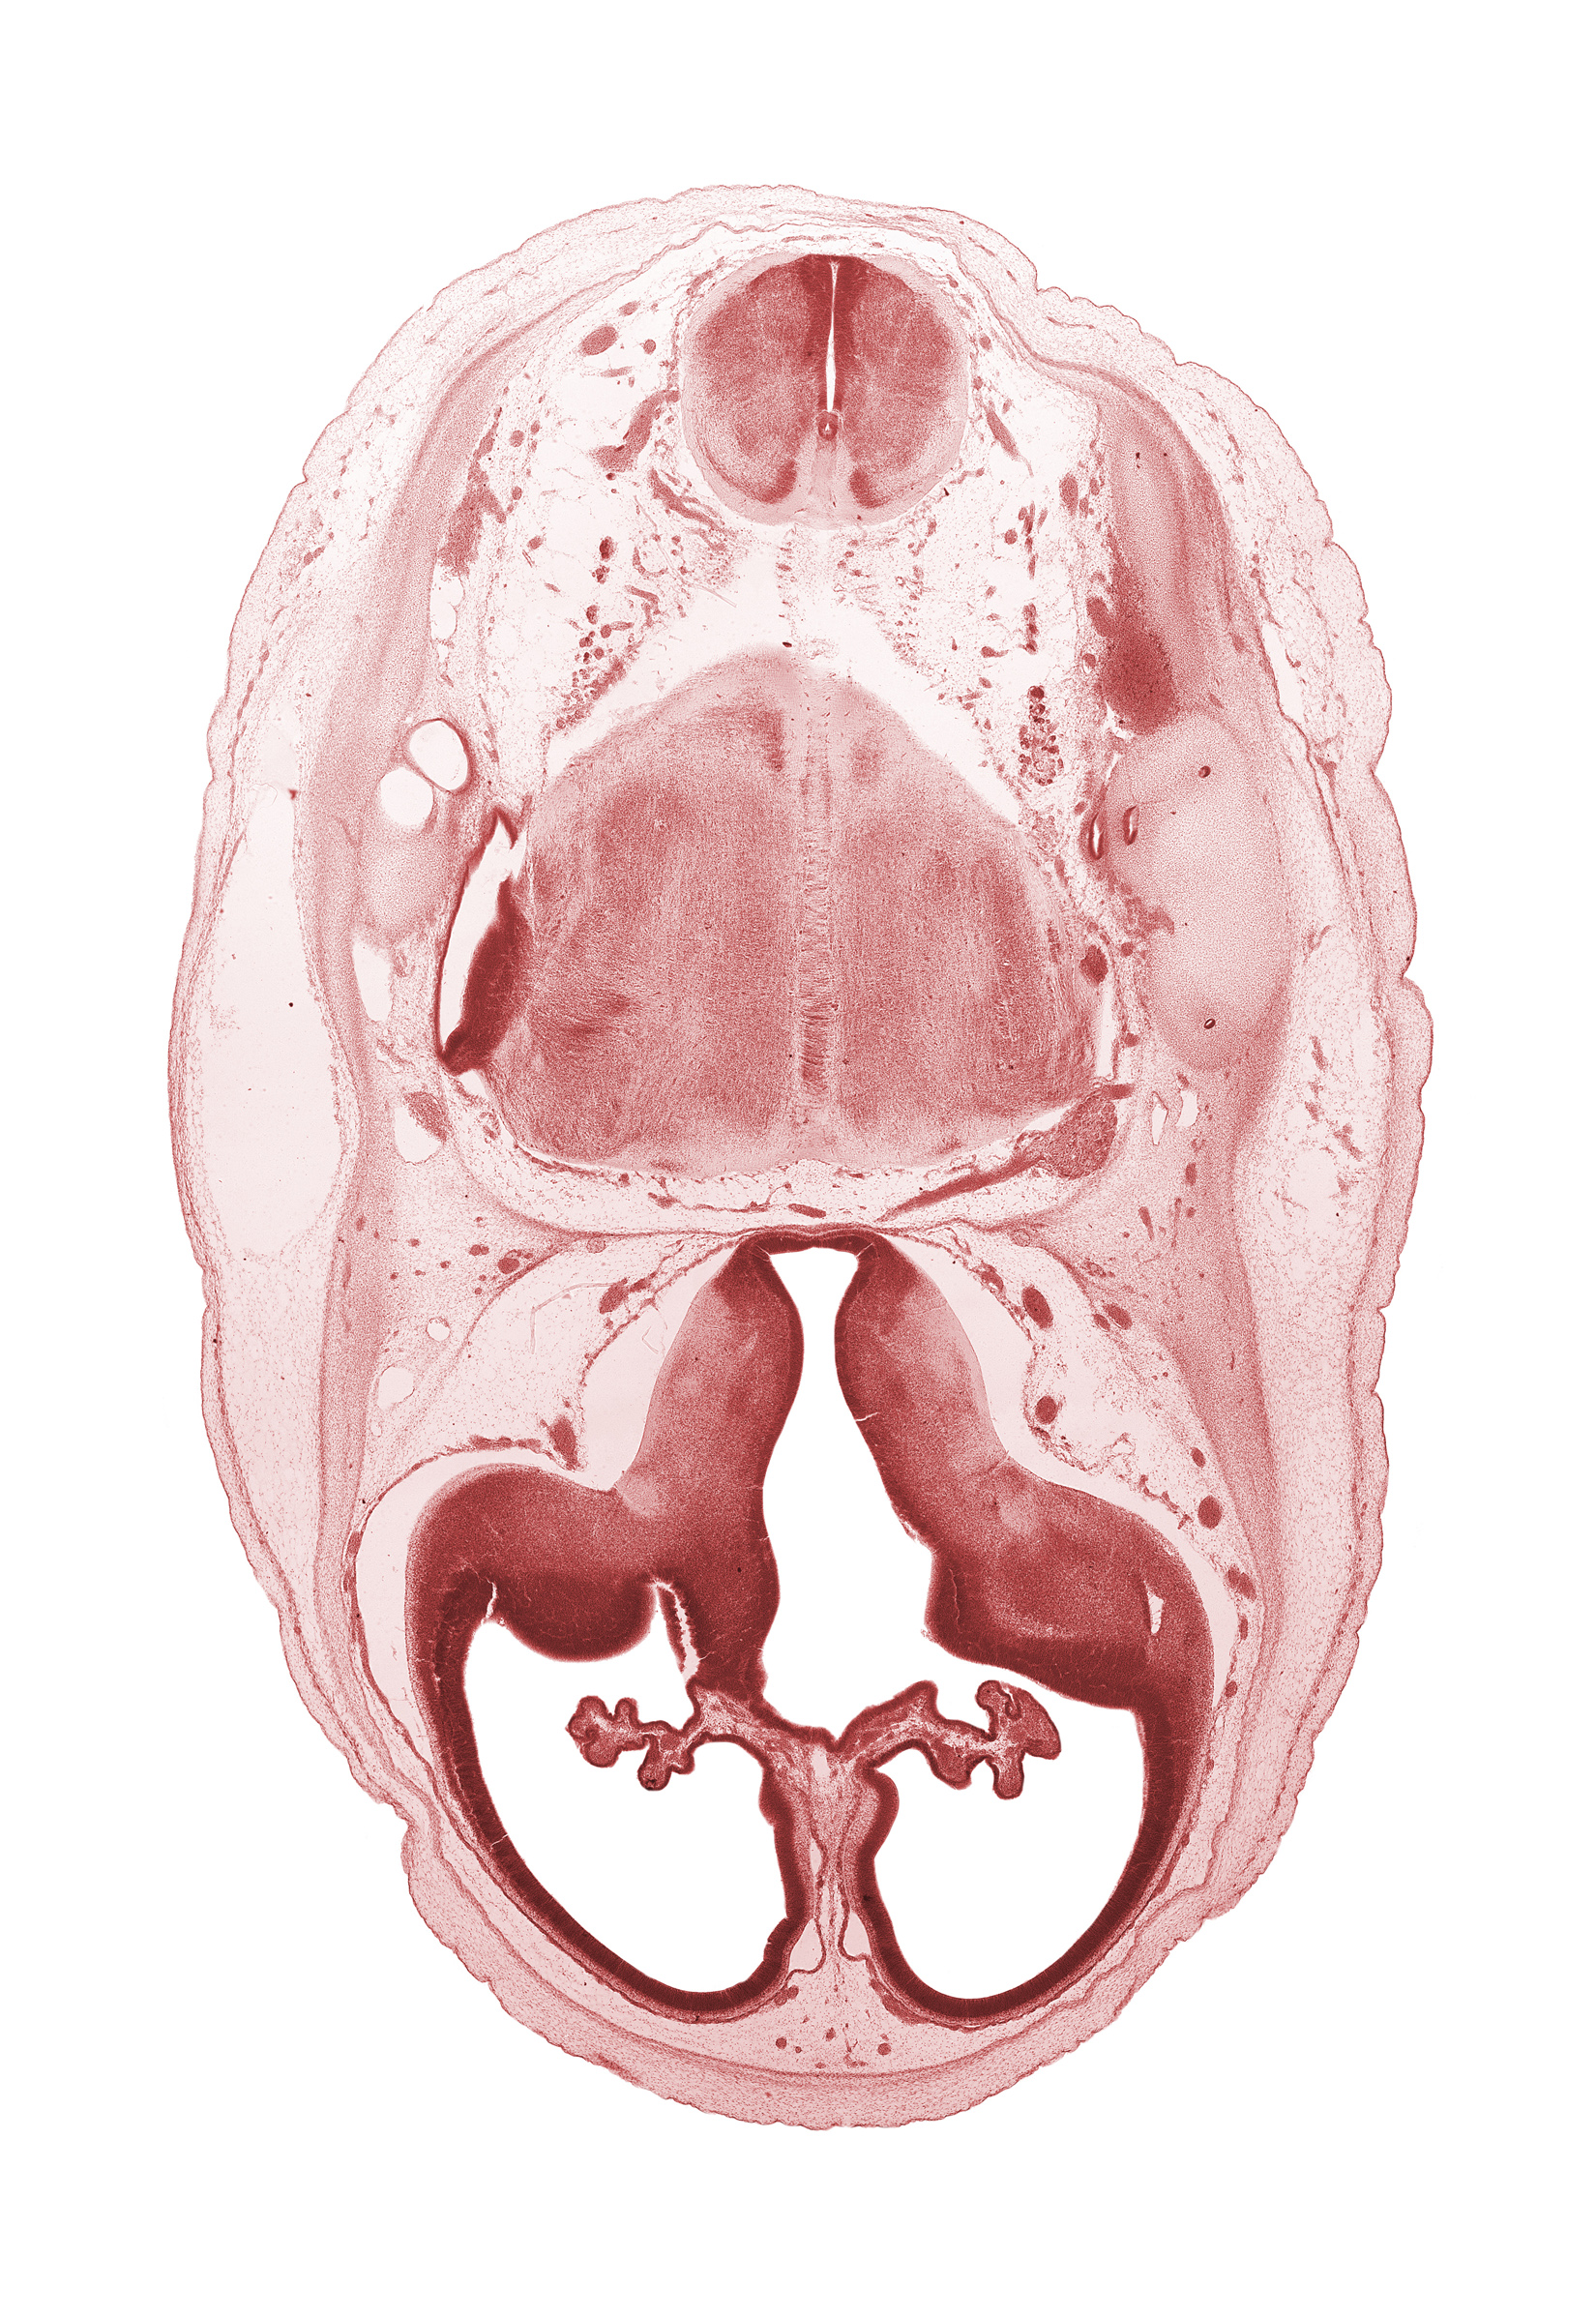 artifact separation(s), endolymphatic duct, internal carotid artery, lateral ventricle, lateral ventricular eminence (telencephalon), medial accessory olivary nucleus, medial ventricular eminence (diencephalon), myelencephalon (medulla oblongata), posterior communicating artery, pyramidal tract region, root of accessory nerve (CN XI), root of trigeminal nerve (CN V), third ventricle